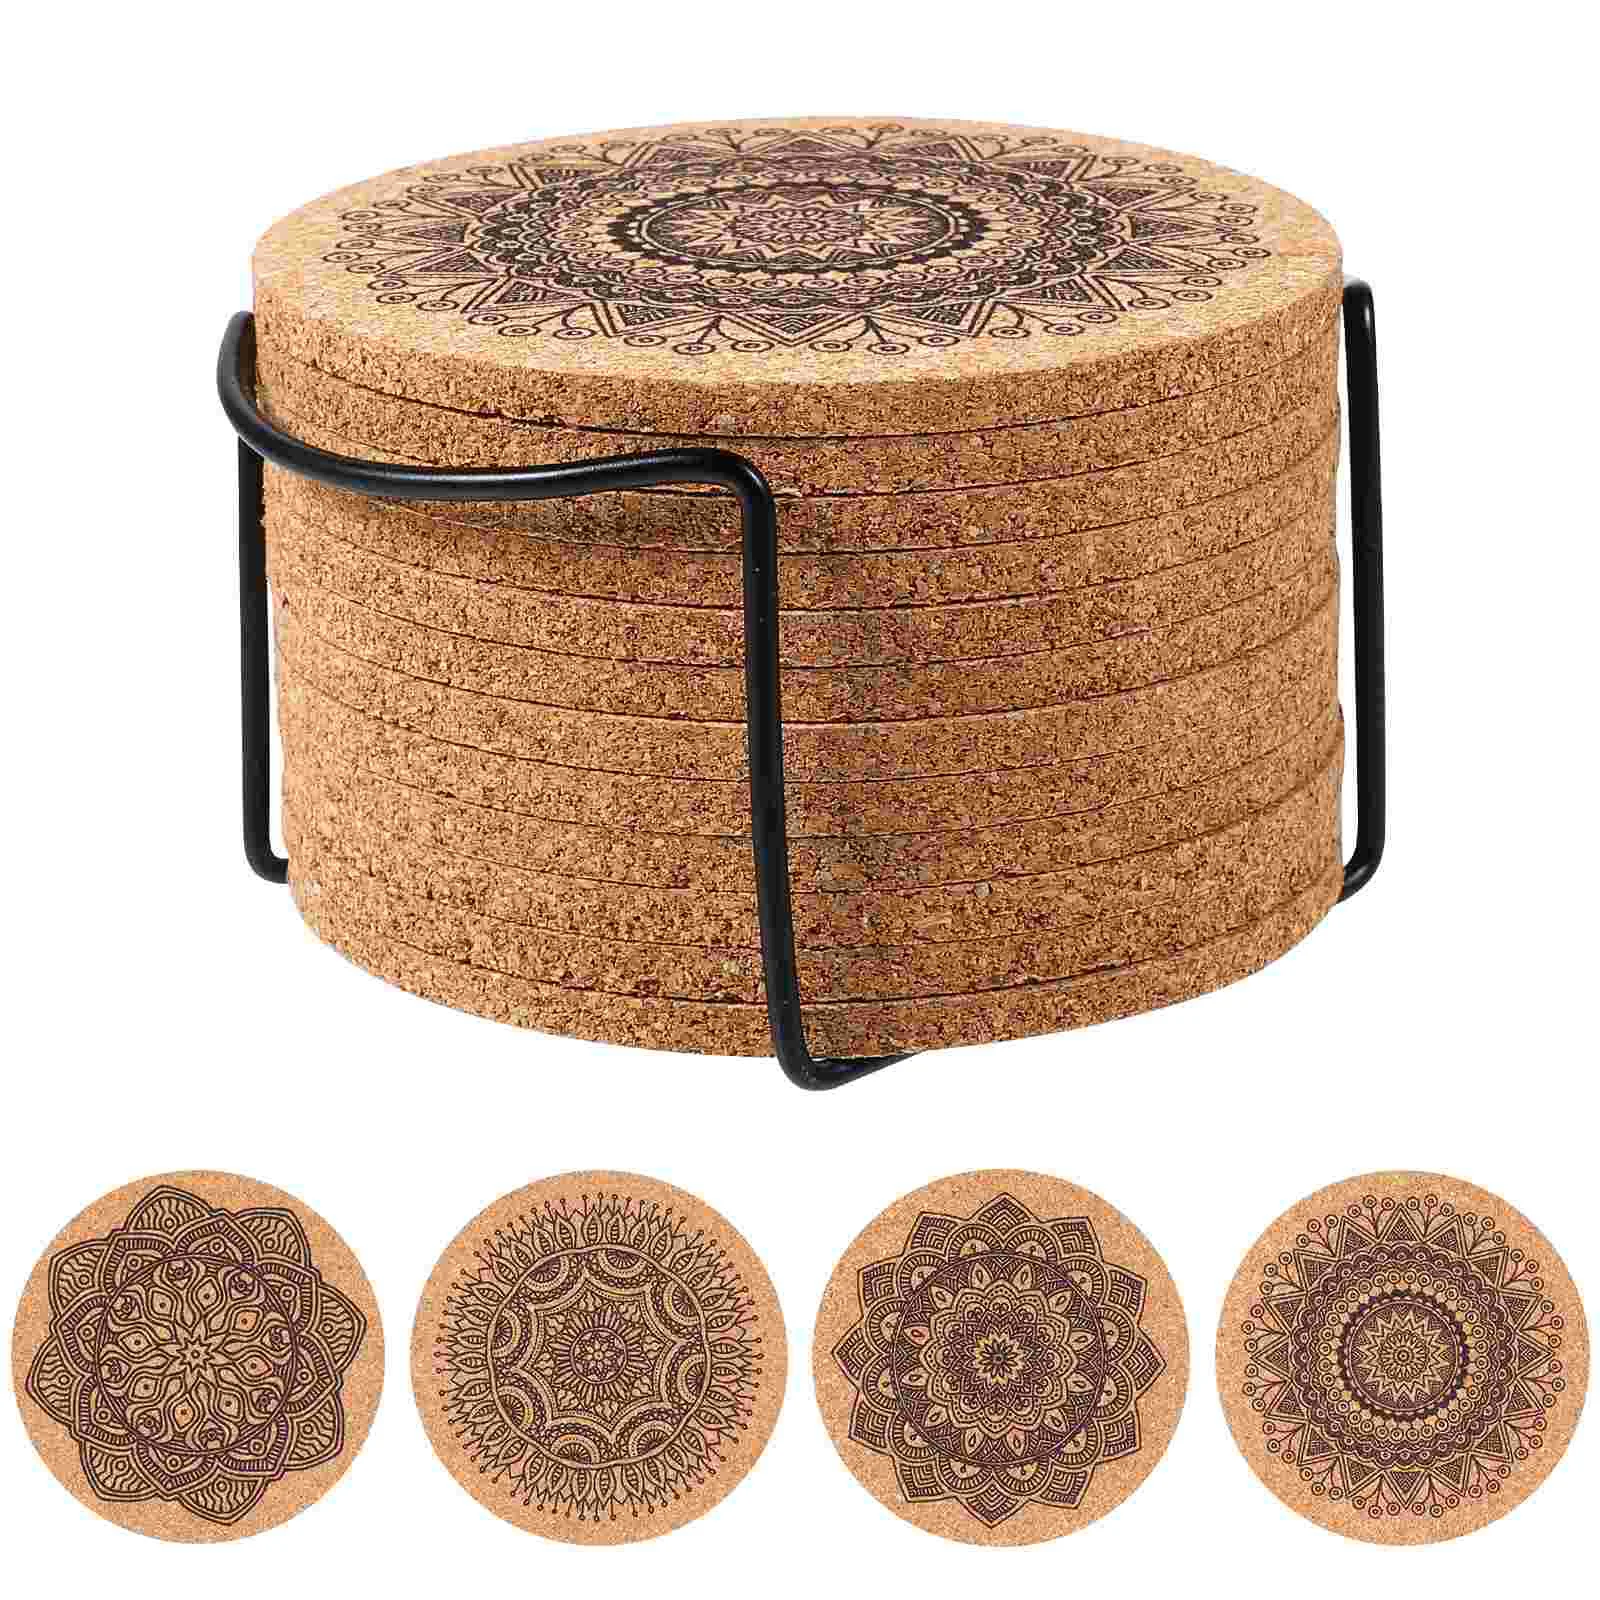 

Round Placemats Drink Mats Cork Placemats Wooden Coasters Drinks Absorbent Coasters Coaster Mat Table Mat Coaster Cup Holder Set